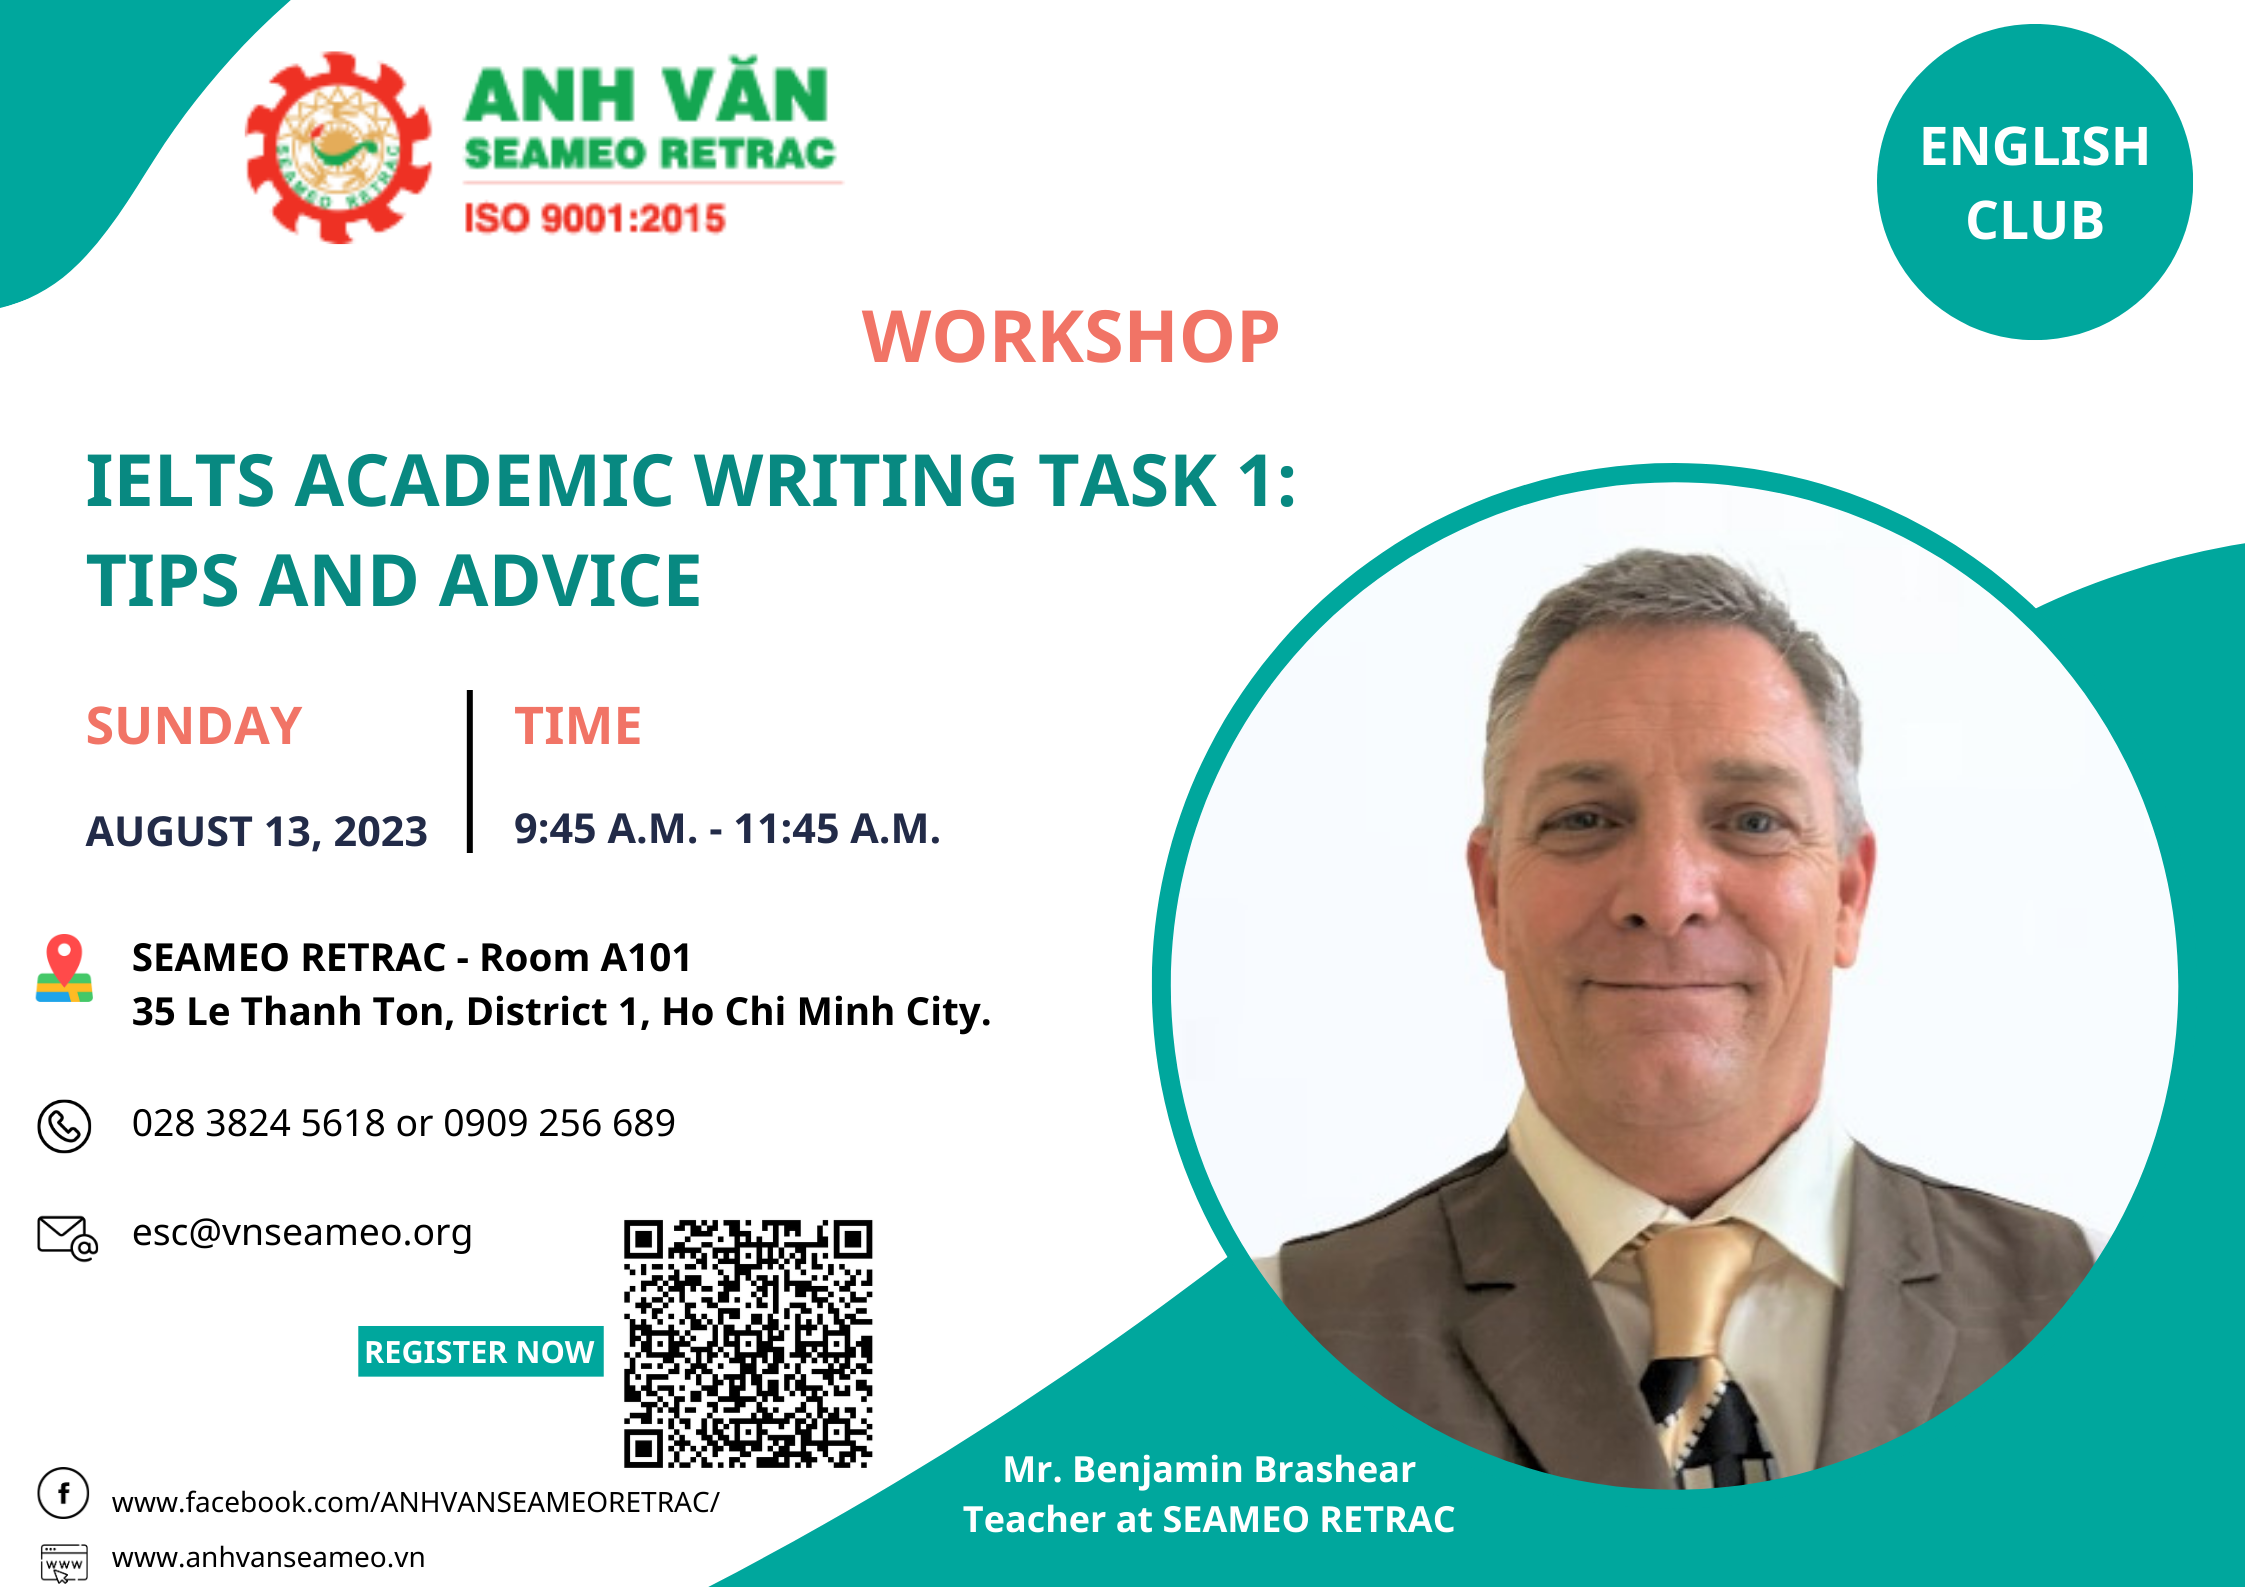 Workshop “IELTS Academic Writing Task 1: Tips and Advice”